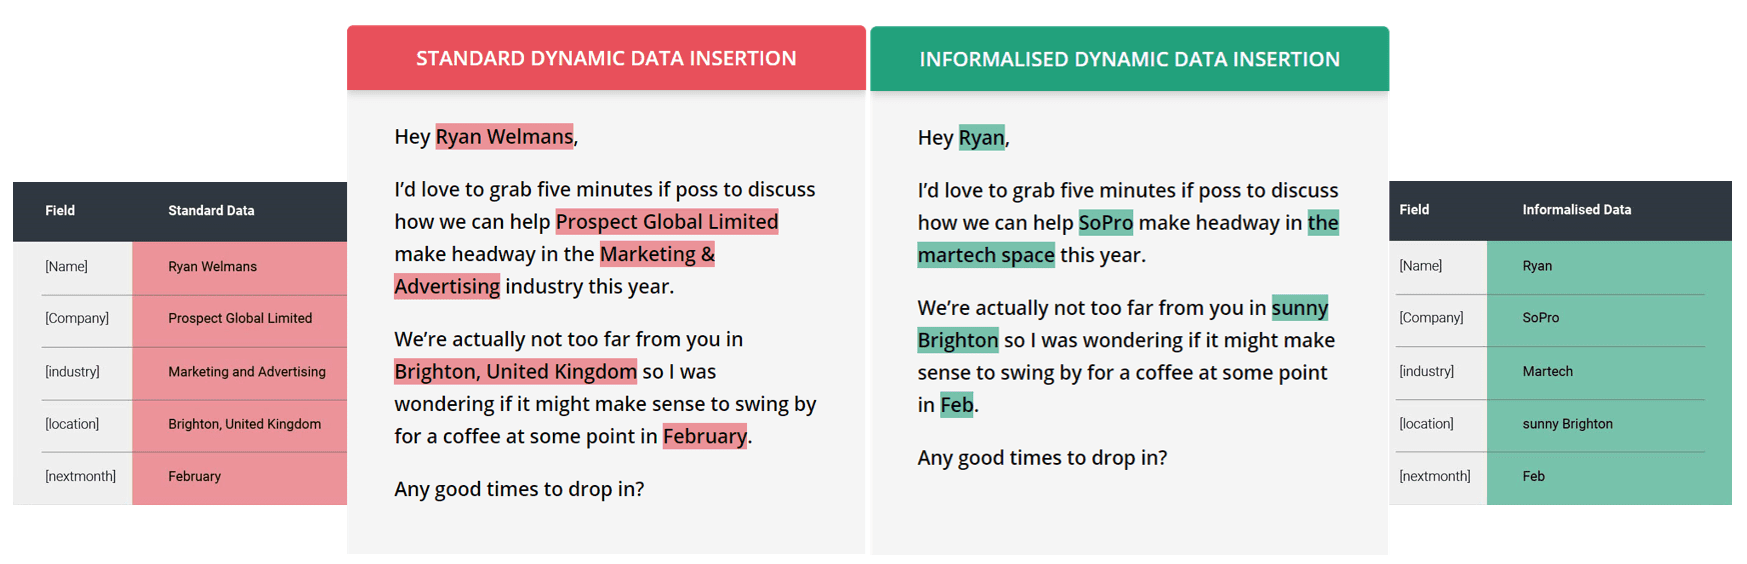 Good data insertion can improve cold email copywriting, as this example shows